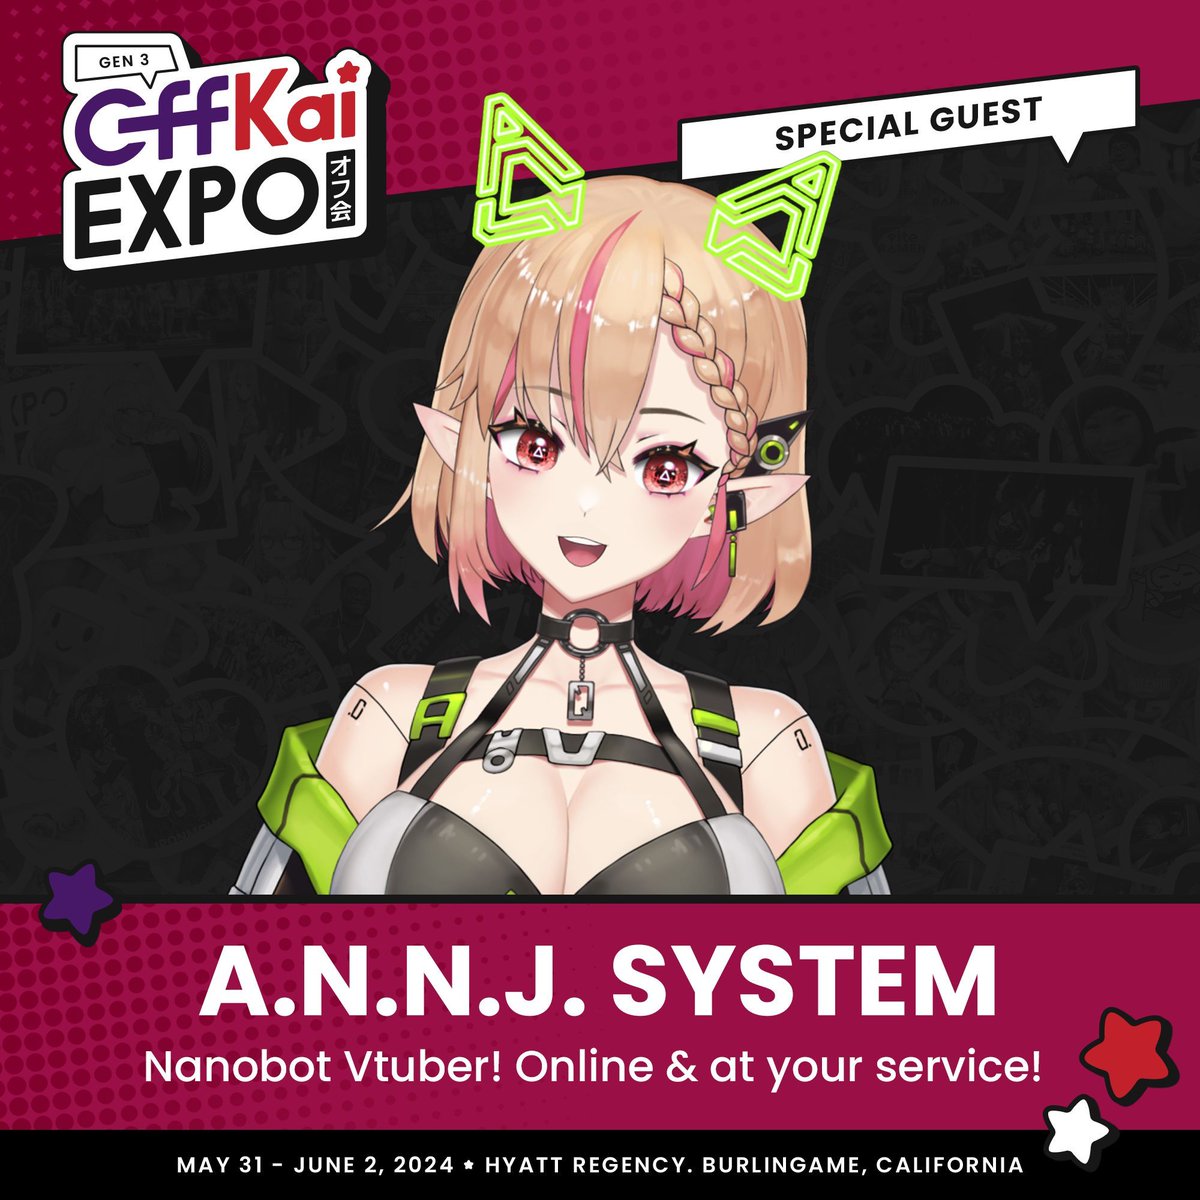 //ᴀᴄᴄᴇss ɢʀᴀɴᴛᴇᴅ// Nanobot Vtuber @Annjelife logging into #OffKaiGen3 & hacking her way into your heart! Join in on the takeover May 31st - June 2nd in Burlingame, CA! ❇️